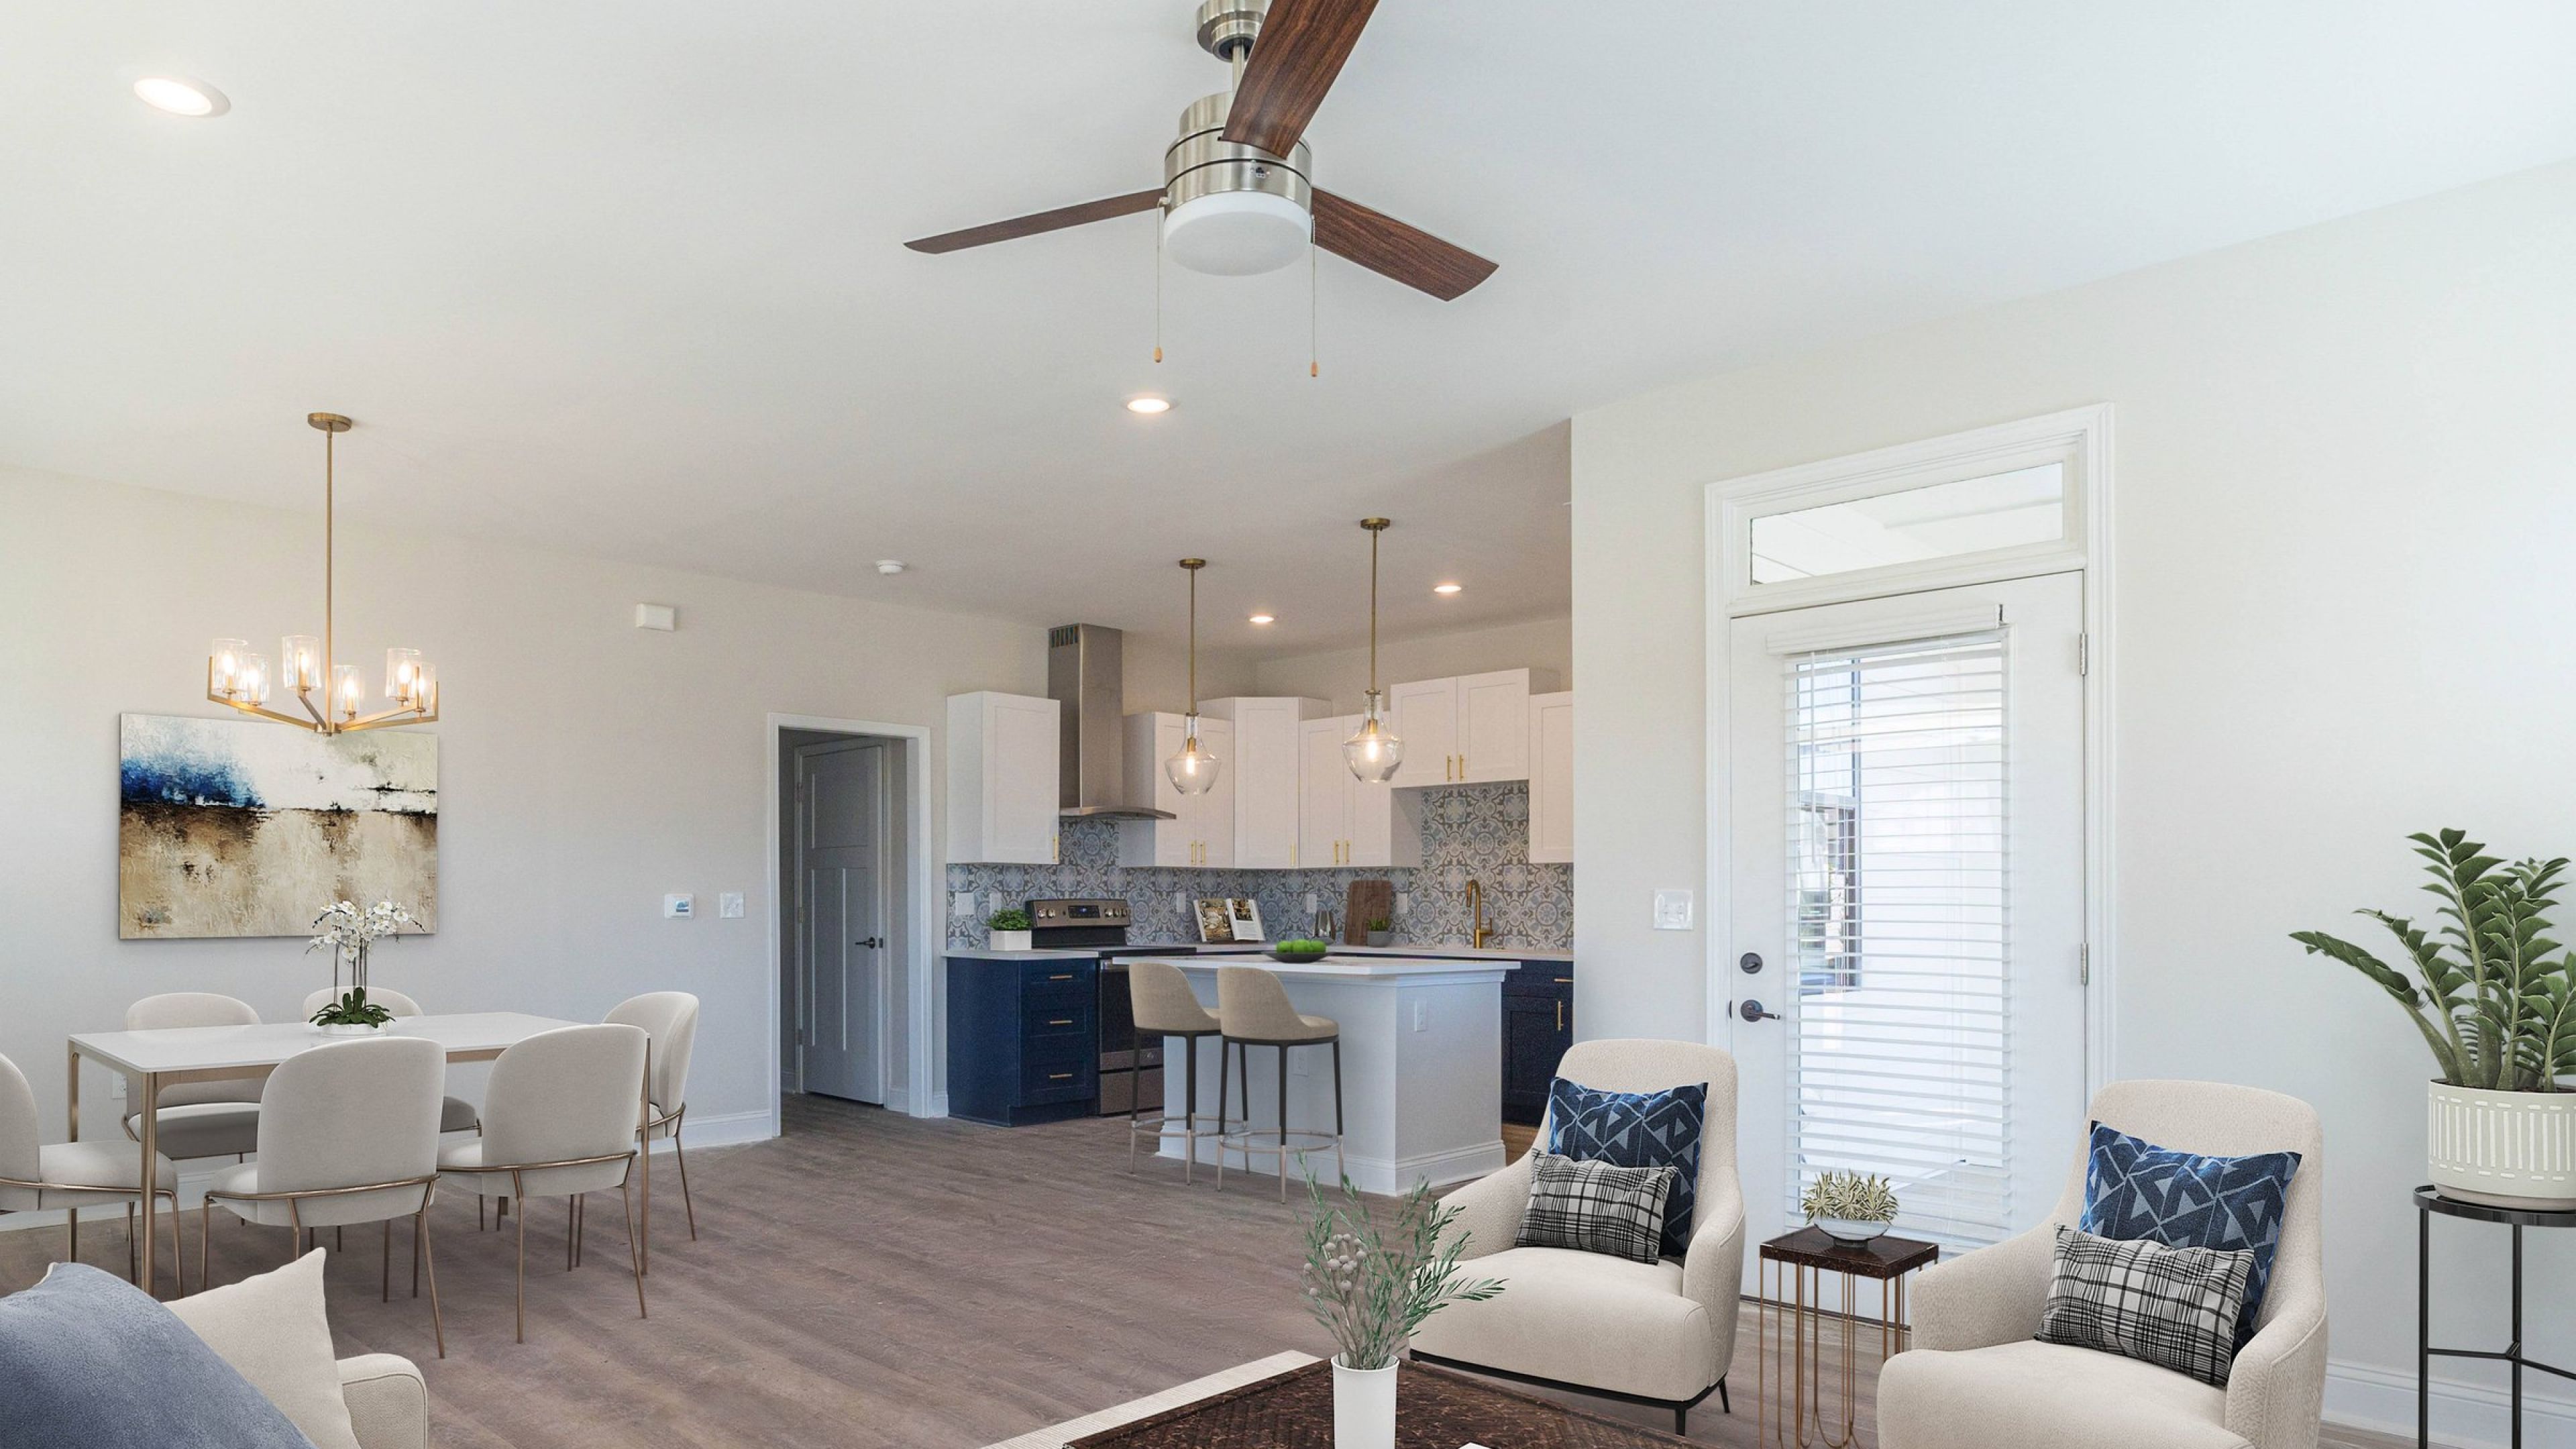 Hawthorne Cottages at Leland home living space and kitchen with open concept layout and beautiful finishes